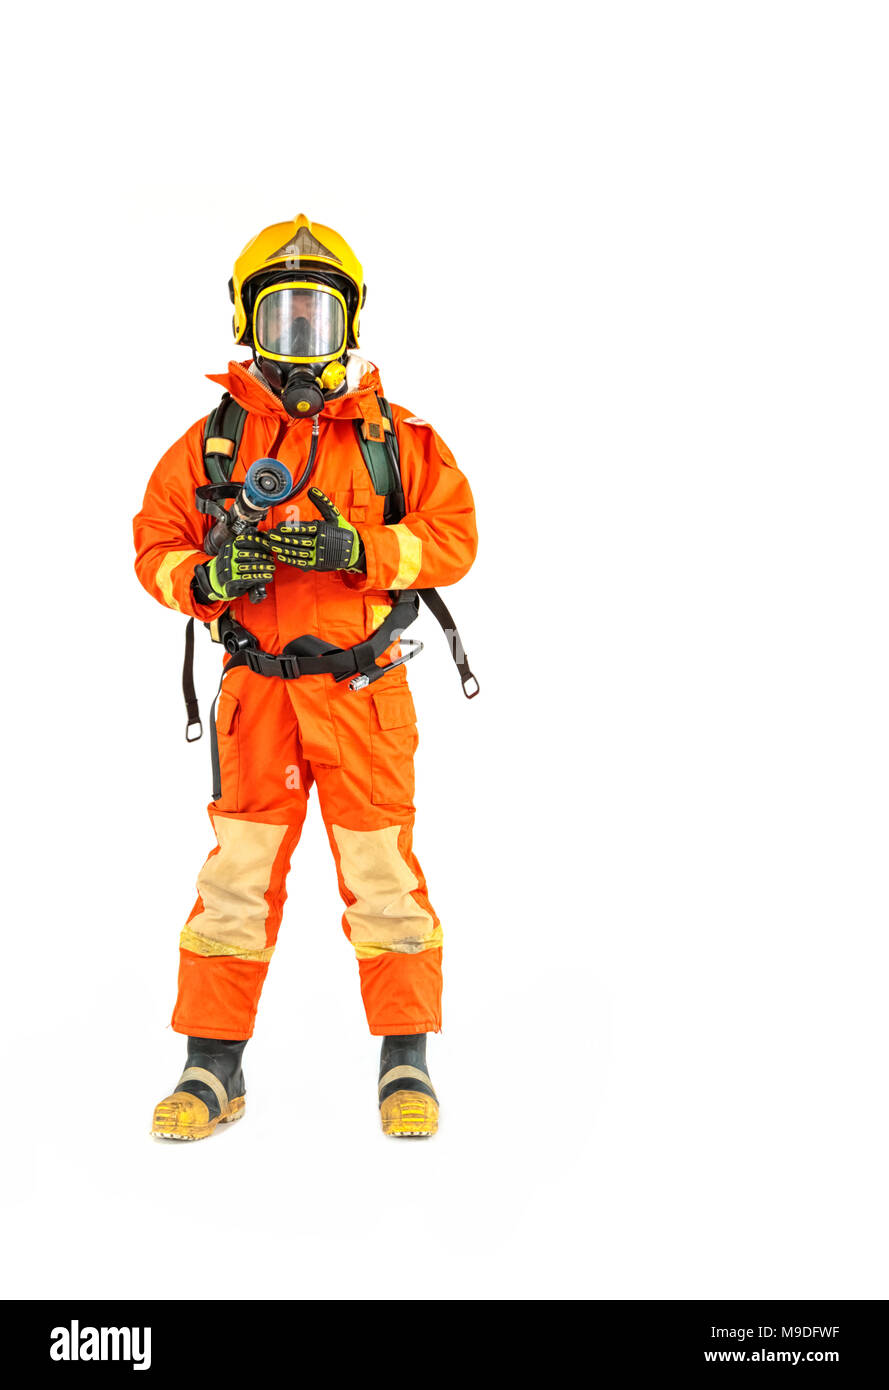 Firefighter in uniform and safety helmet standing full body length Stock Photo